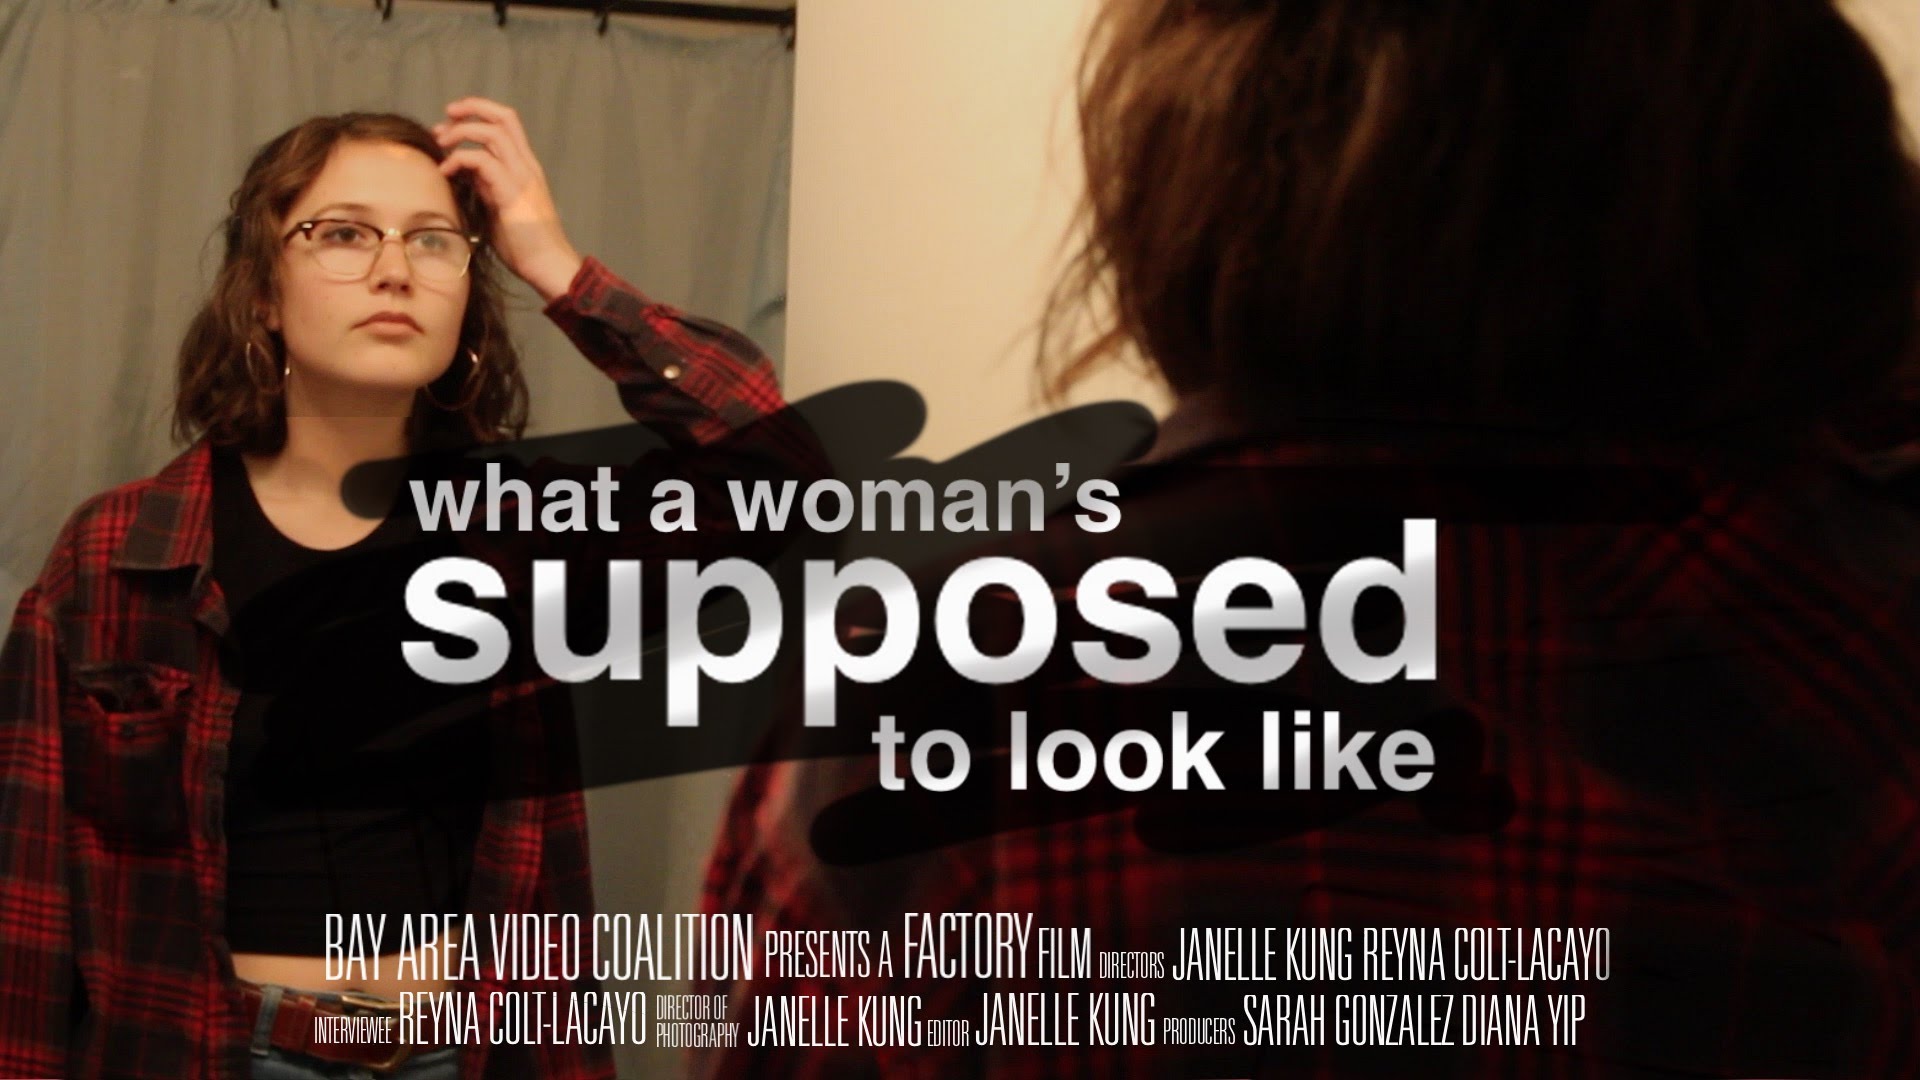 what a woman's supposed to look like - YouTube